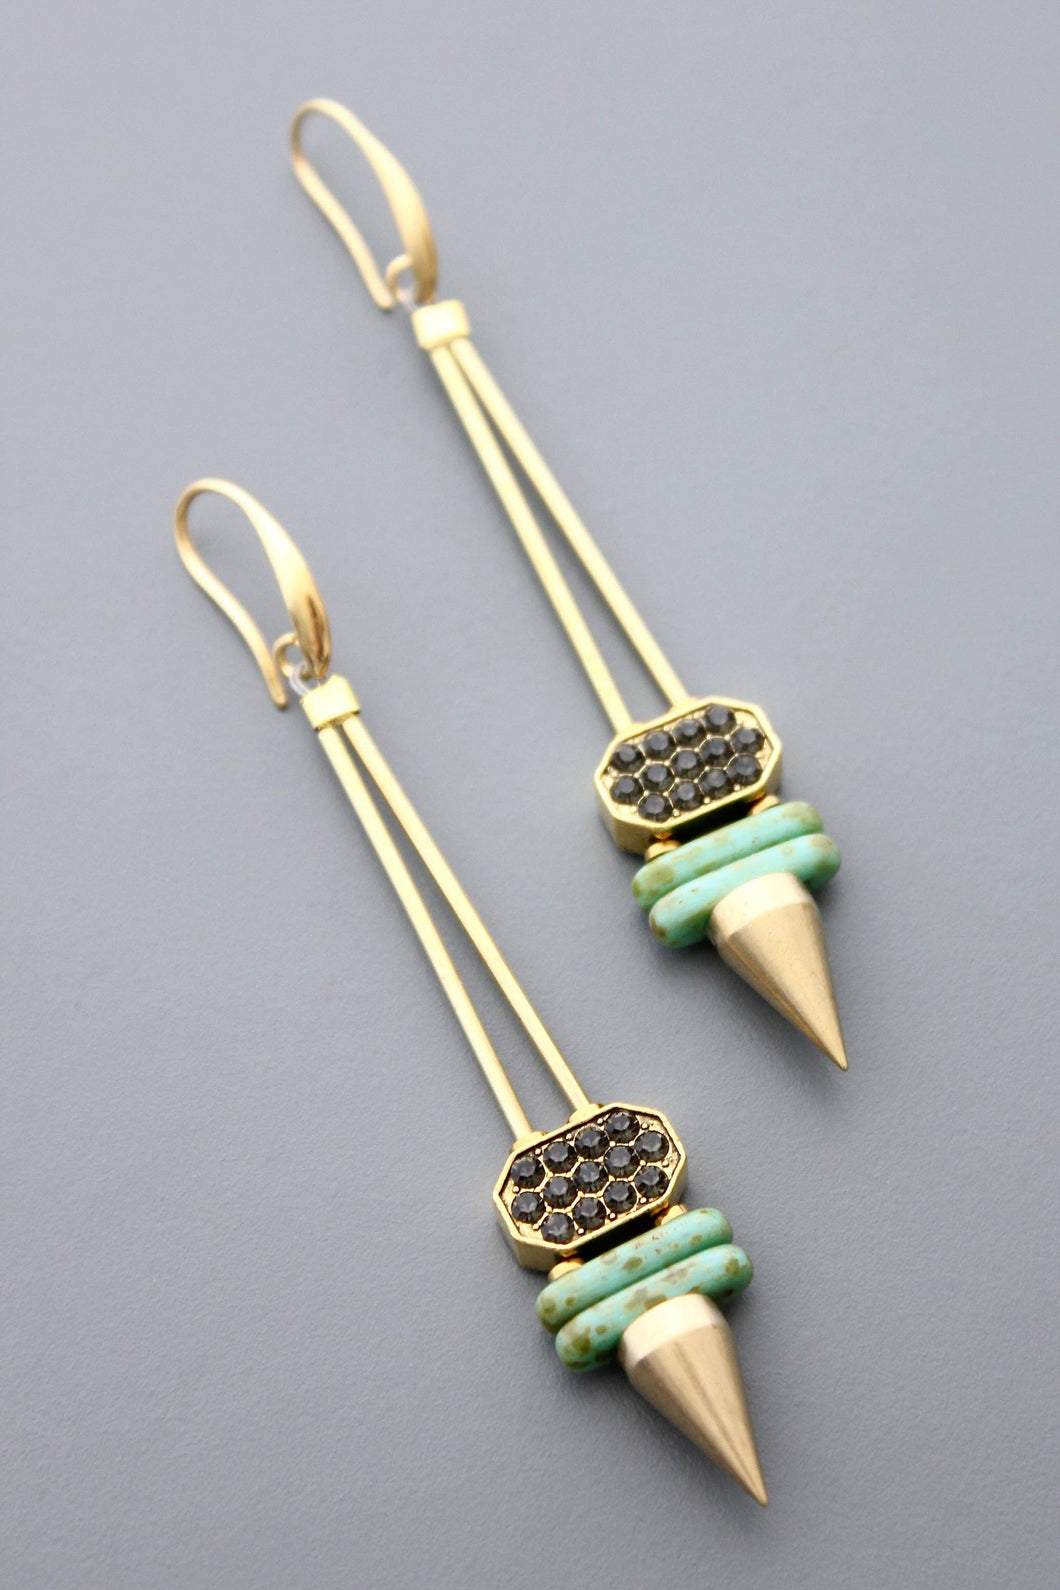 HYLE85 Turquoise and glass earrings